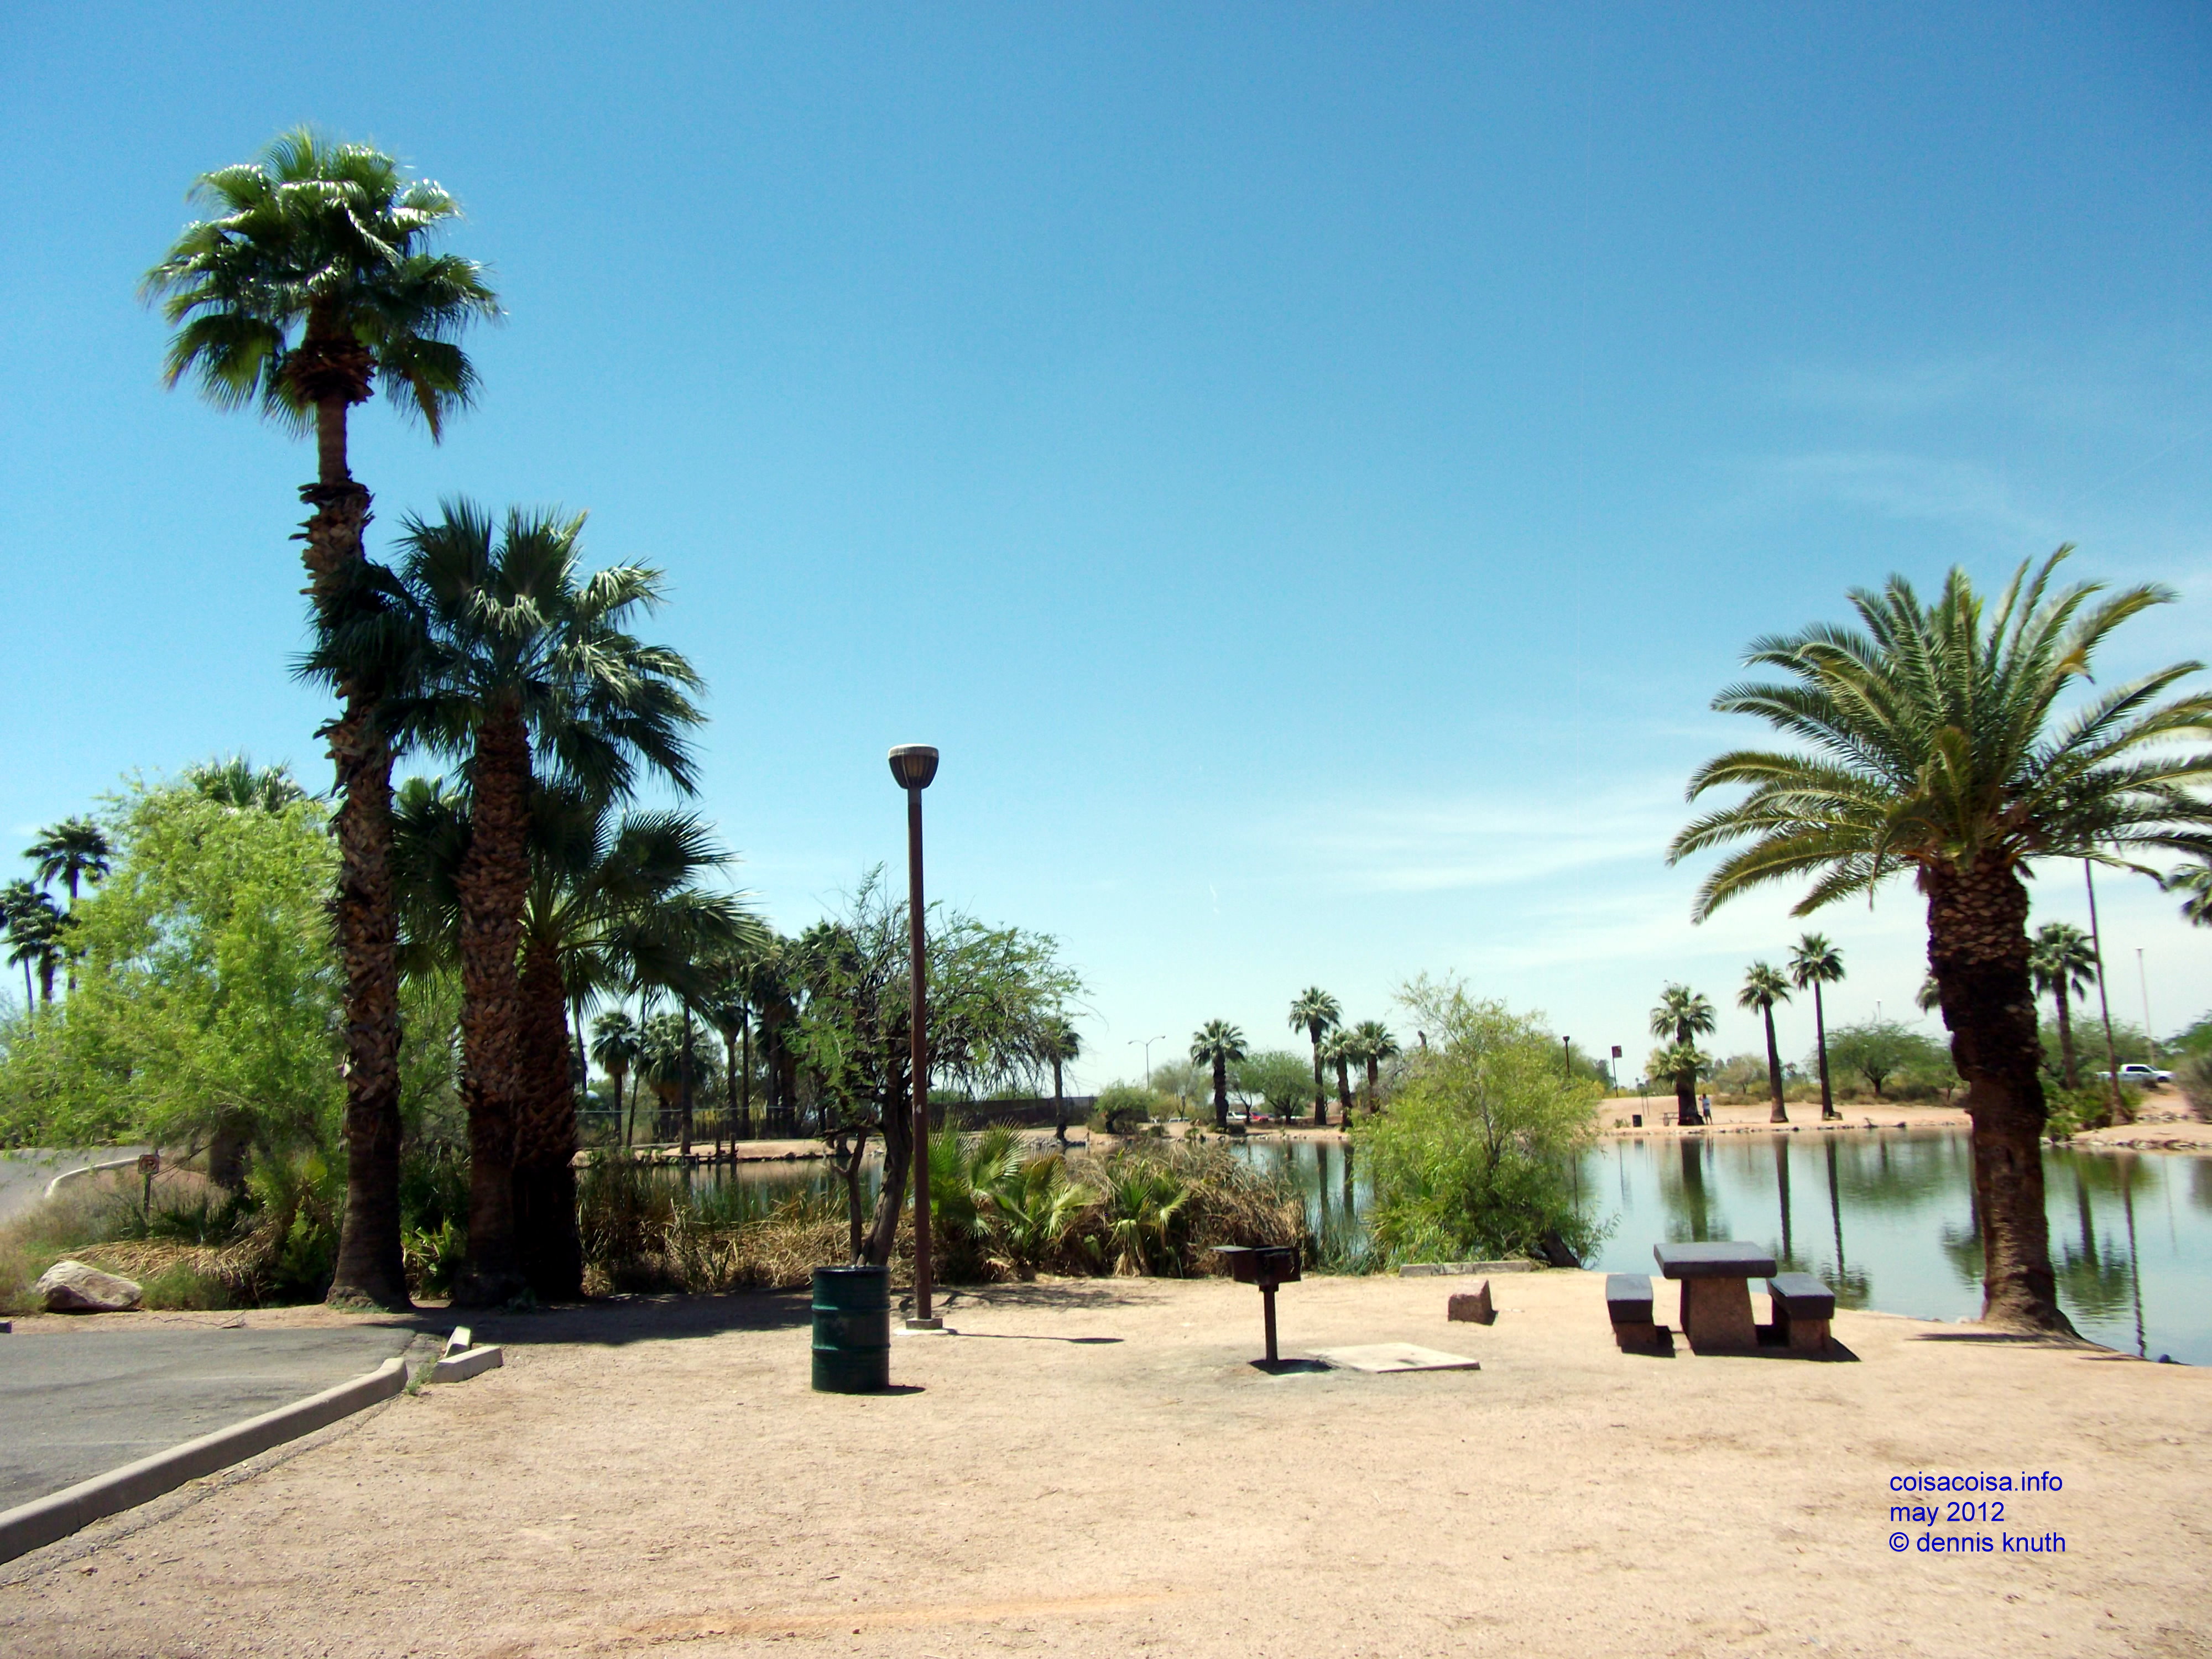 Palms line the Park in Papago